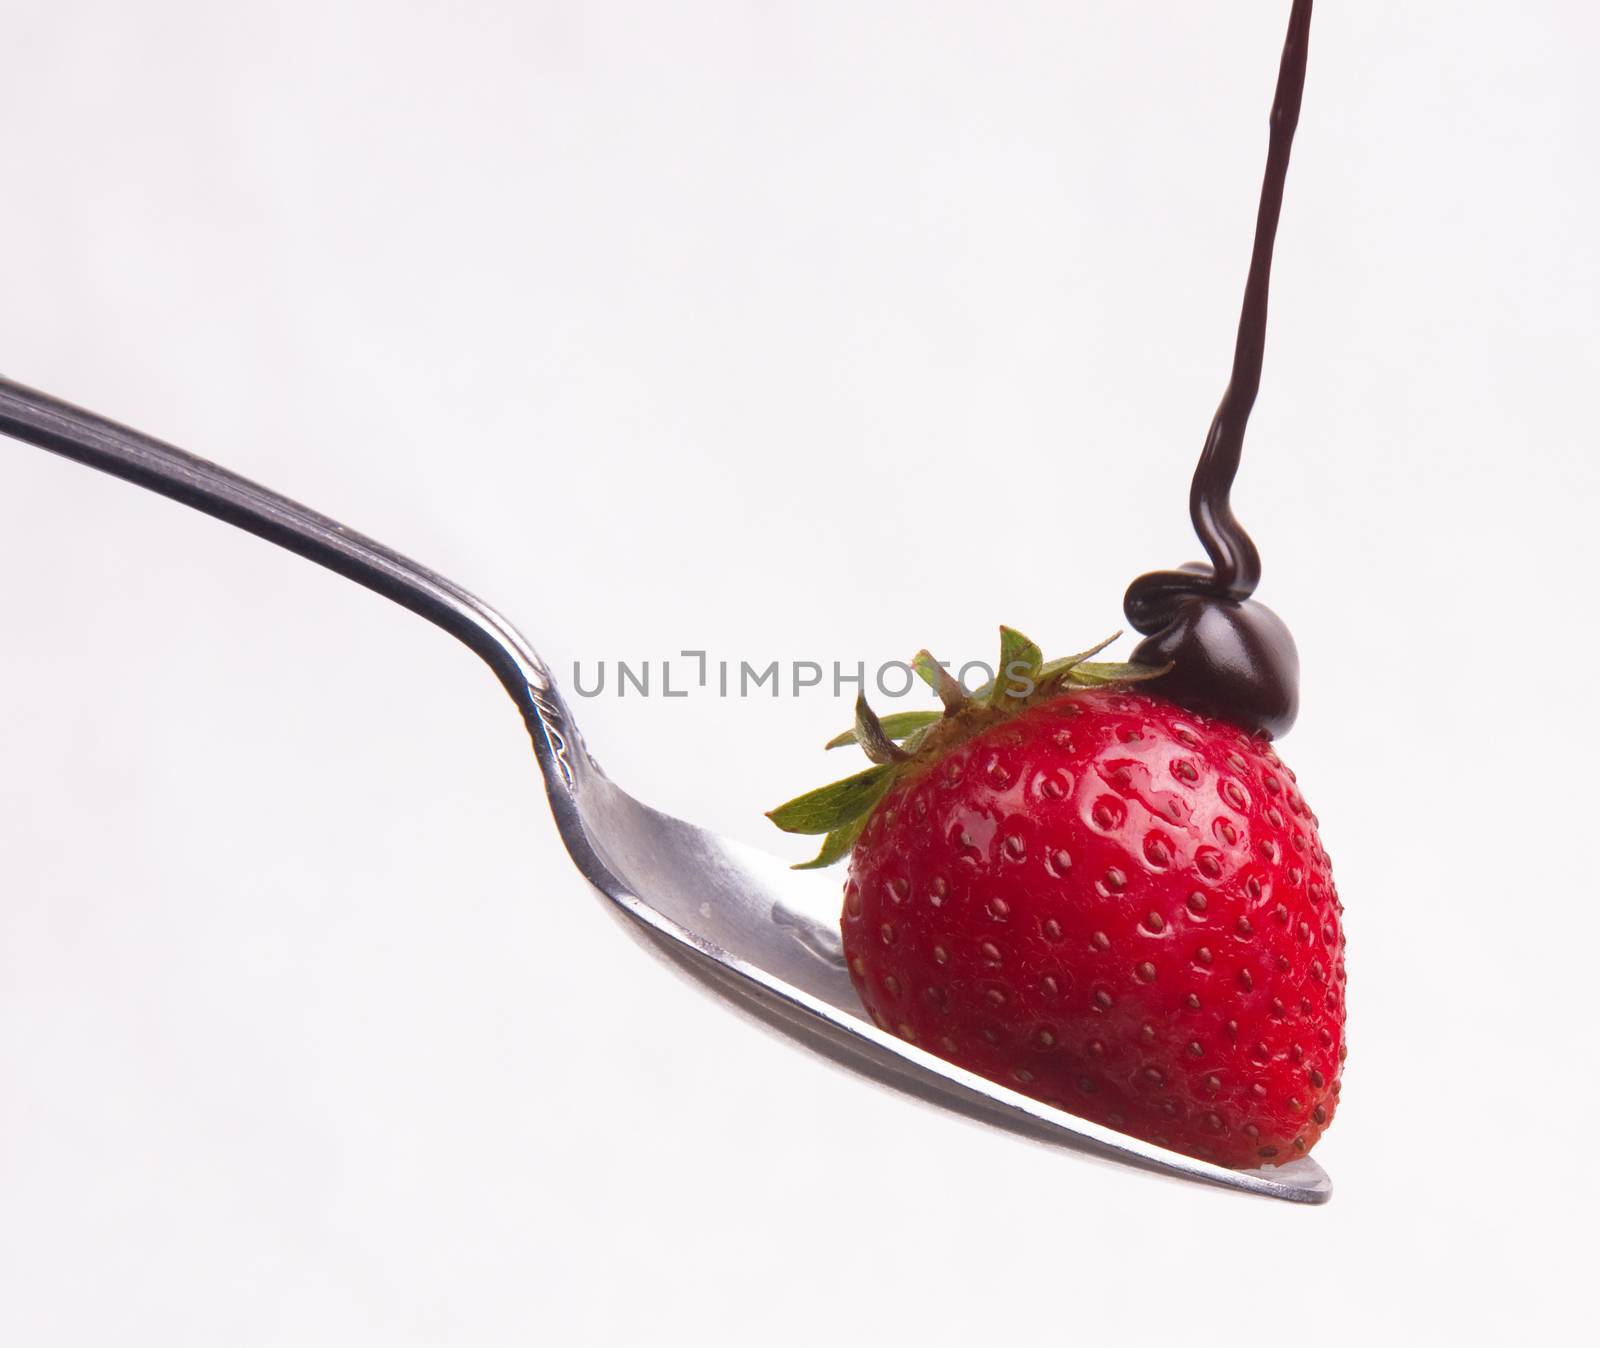 Chocolate sauce hits the berry on a spoon